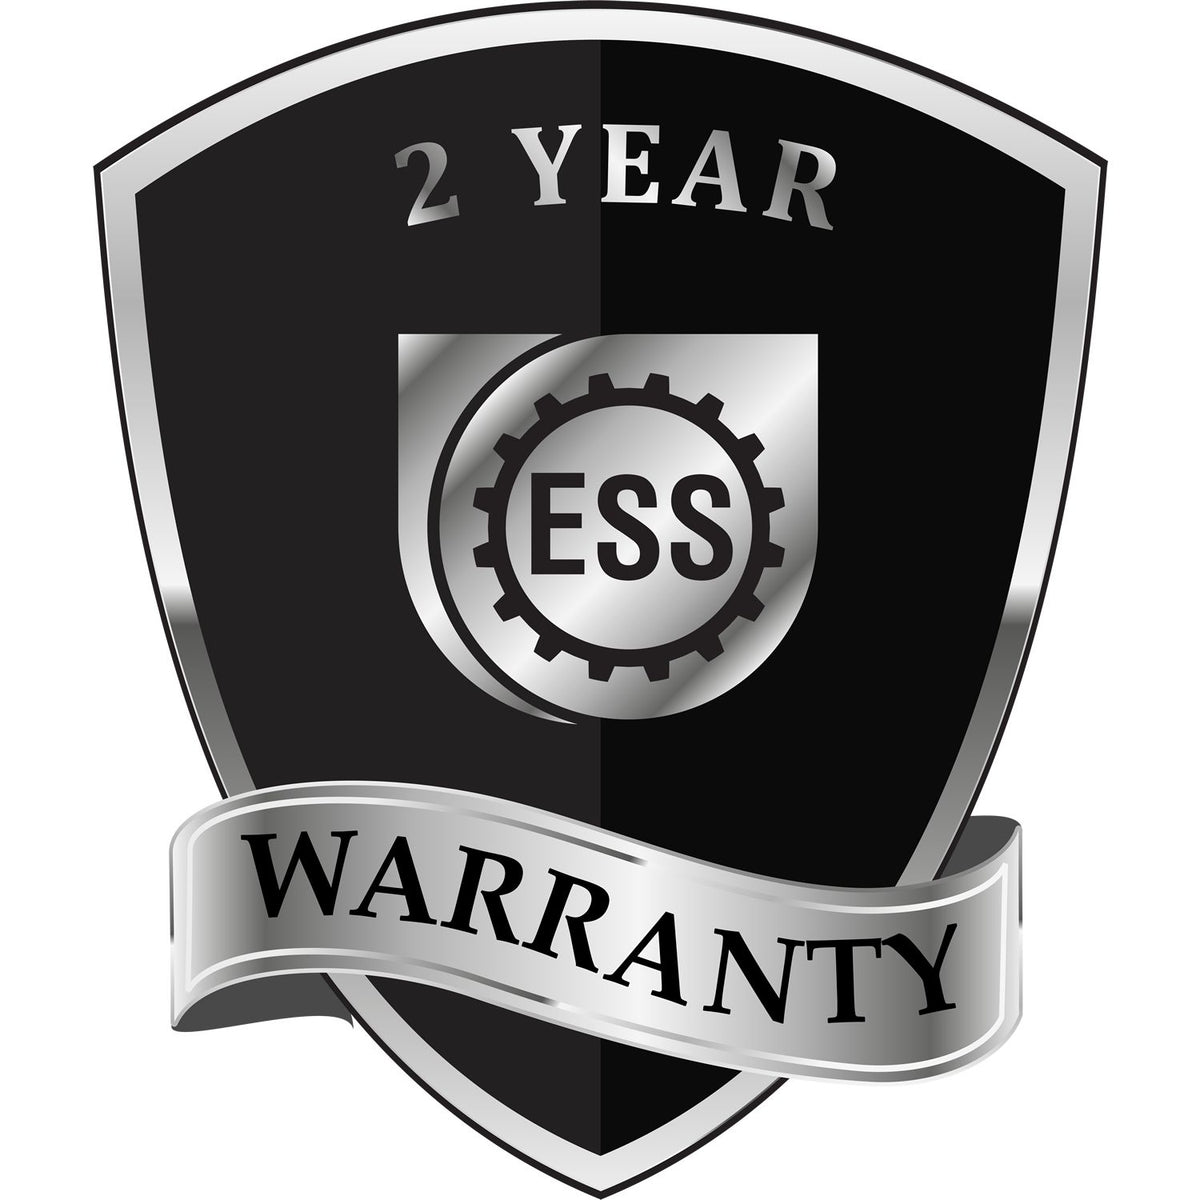 A badge or emblem showing a warranty icon for the Heavy Duty Cast Iron Nebraska Architect Embosser